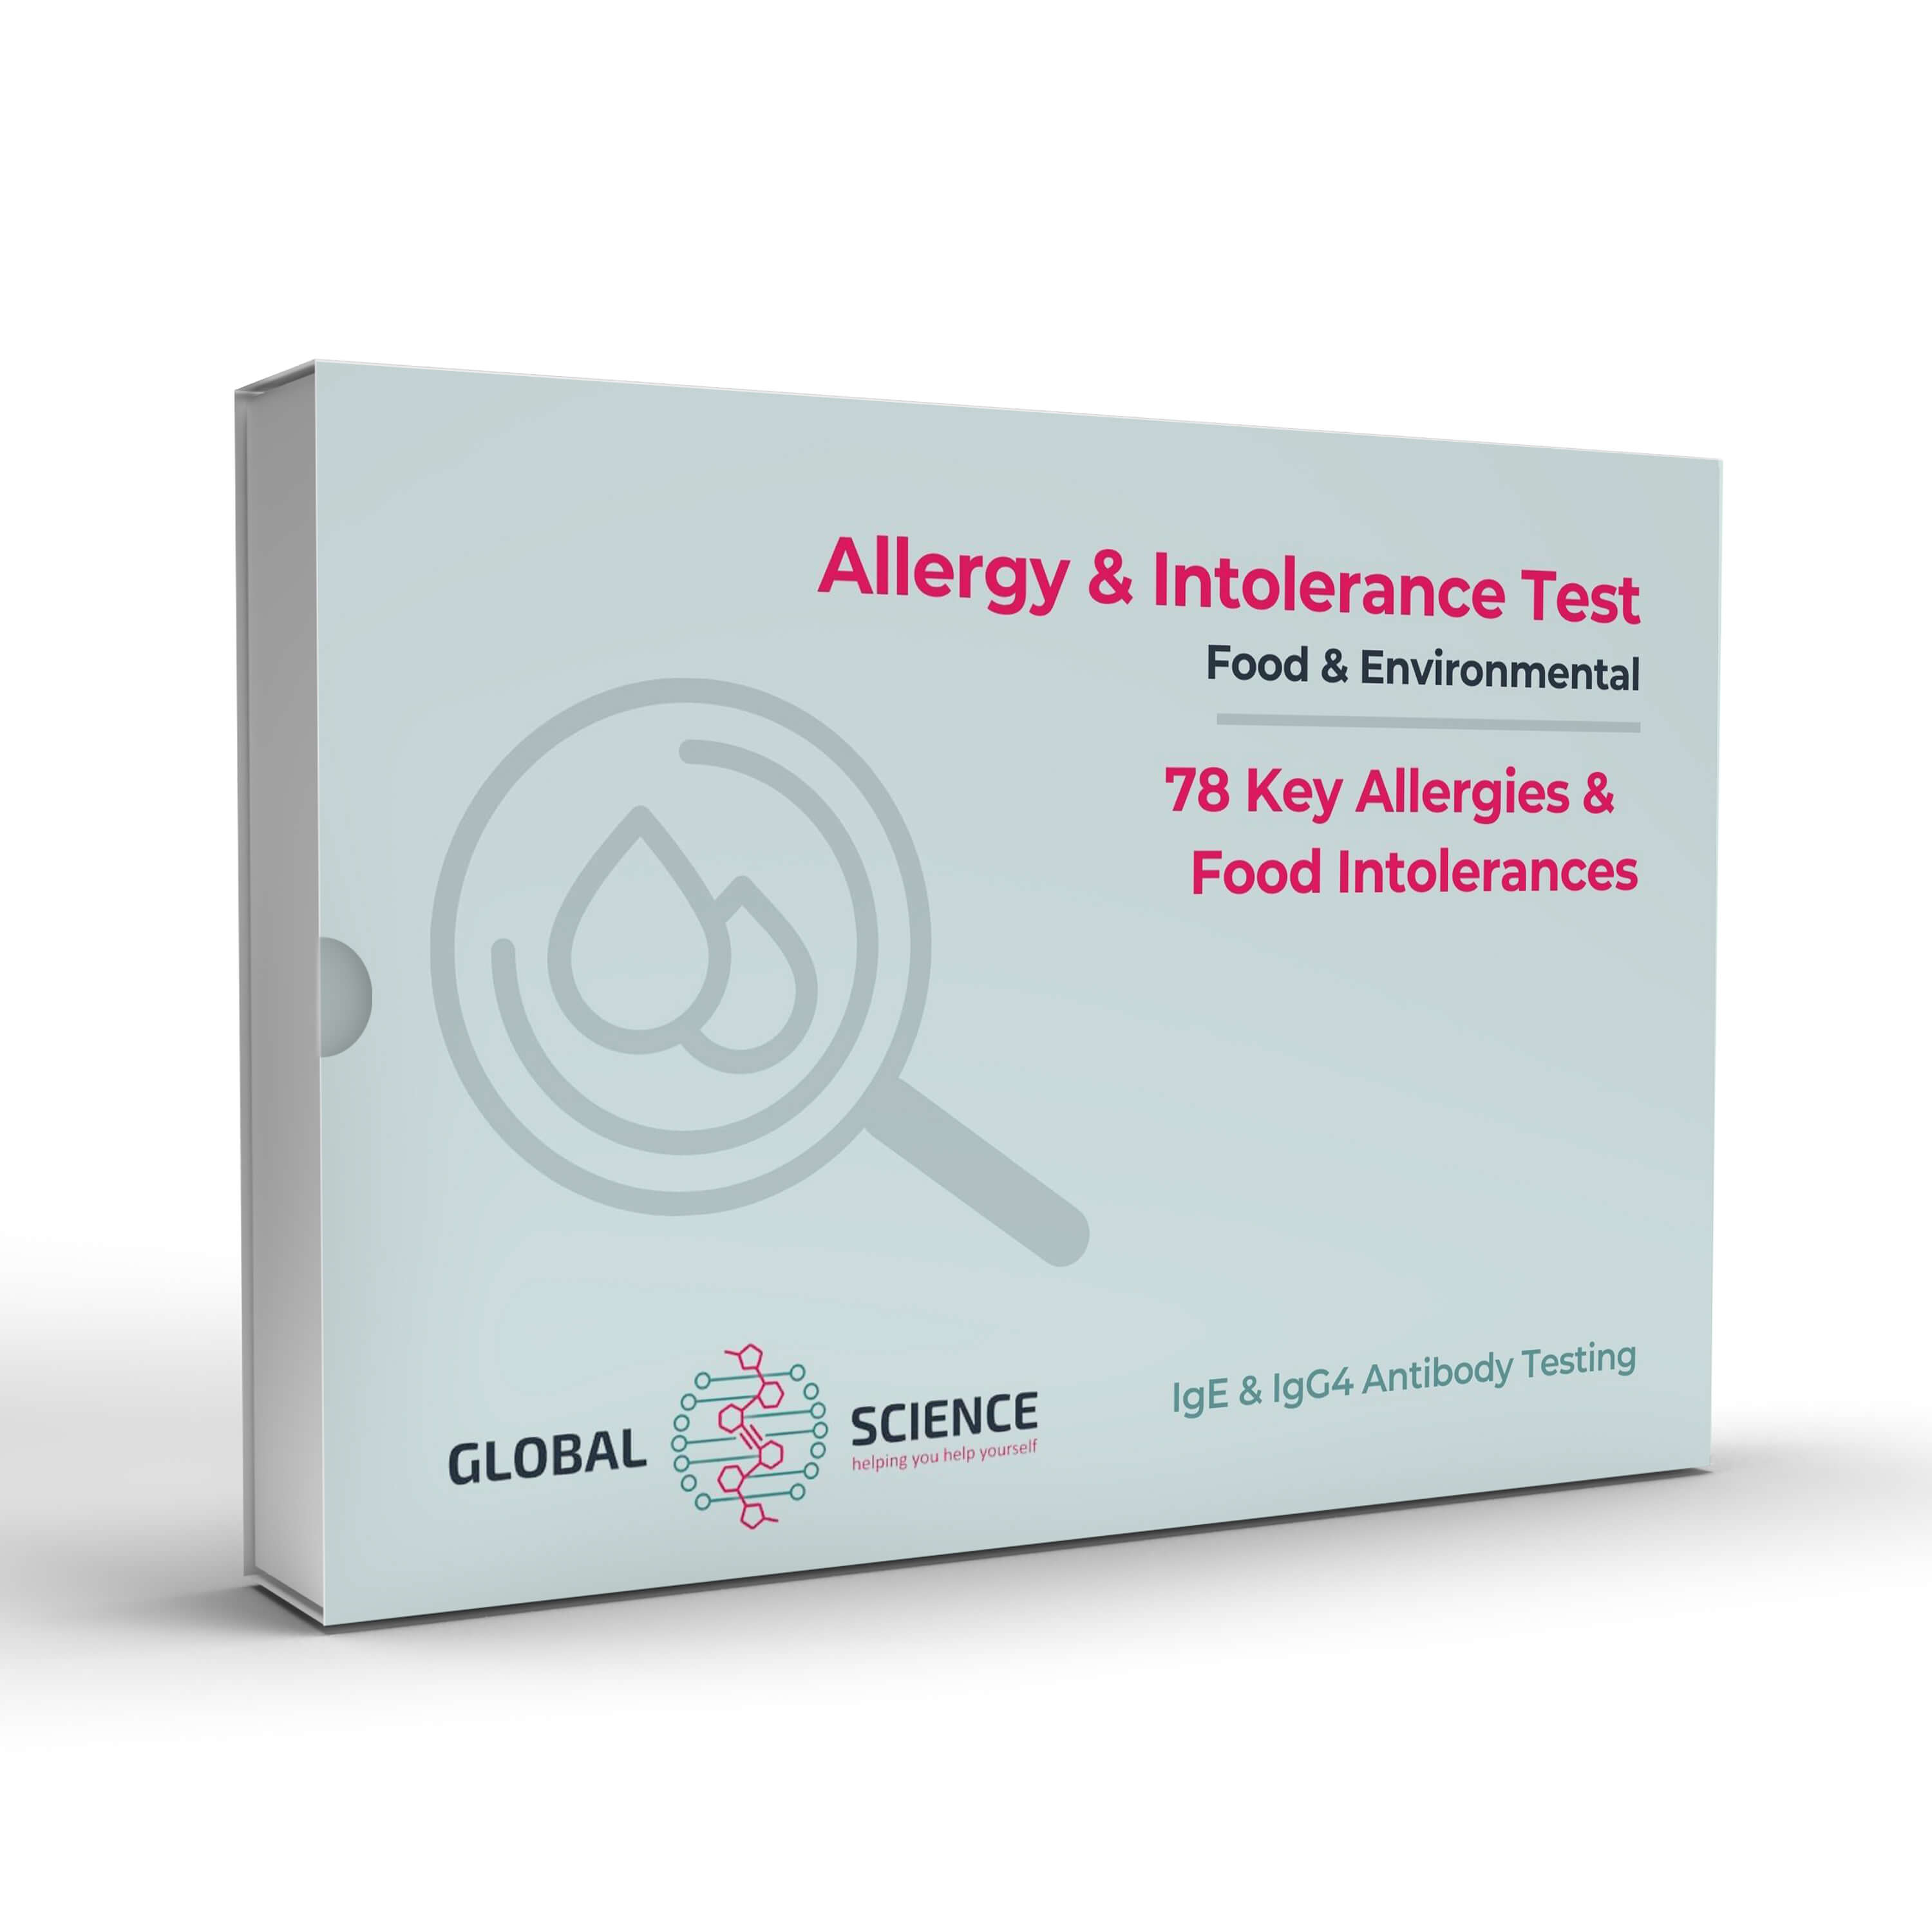 Allergy Intolerance 78 Mock up - Elimination diet following an allergy or intolerance test